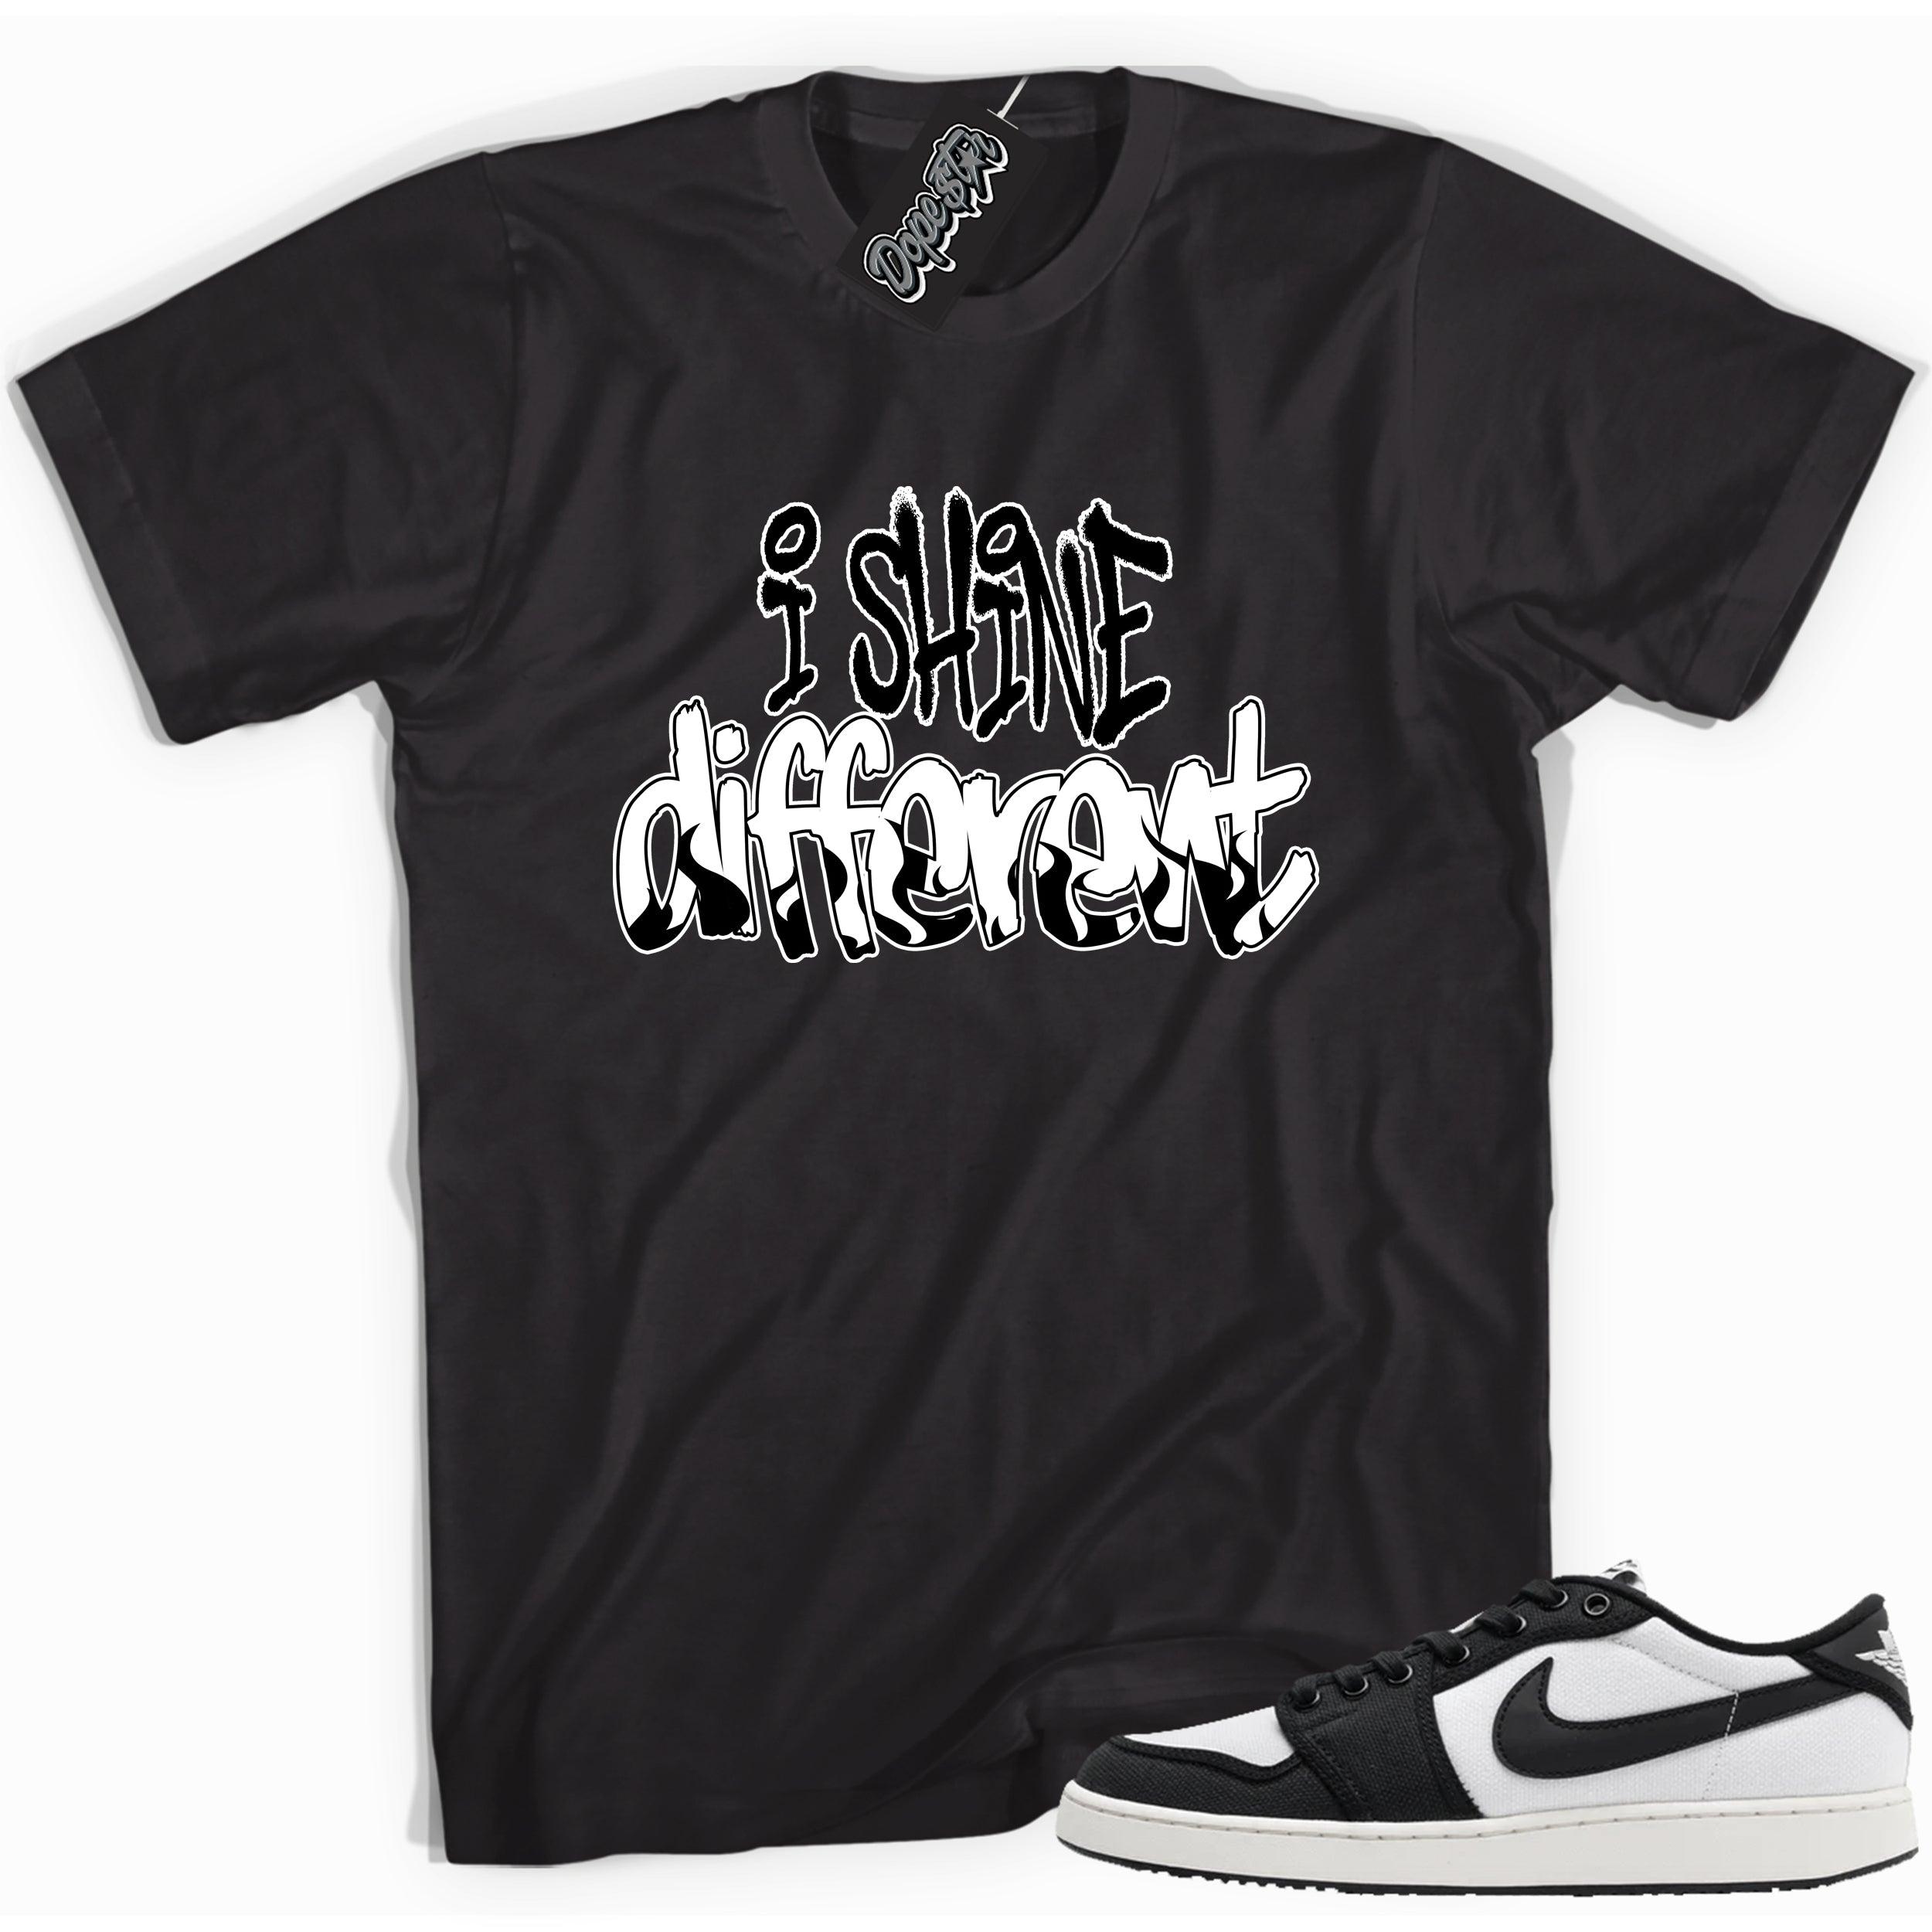 Cool black graphic tee with 'i shine different' print, that perfectly matches Air Jordan 1 Retro Ajko Low Black & White sneakers.